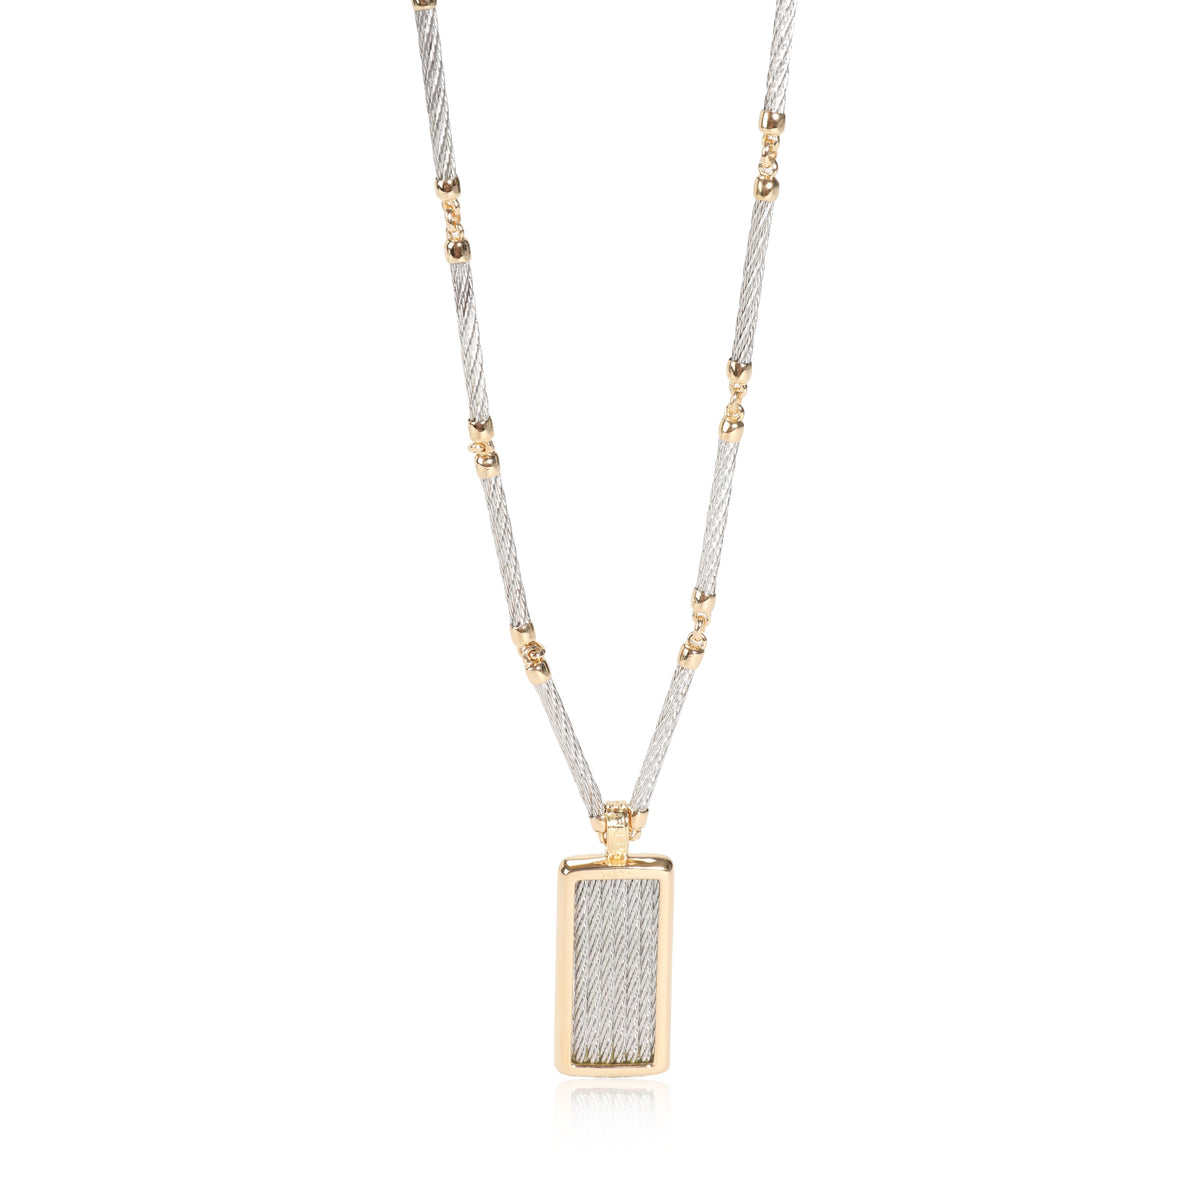 Force 10 necklace 18k white gold and diamonds medium model - Fred